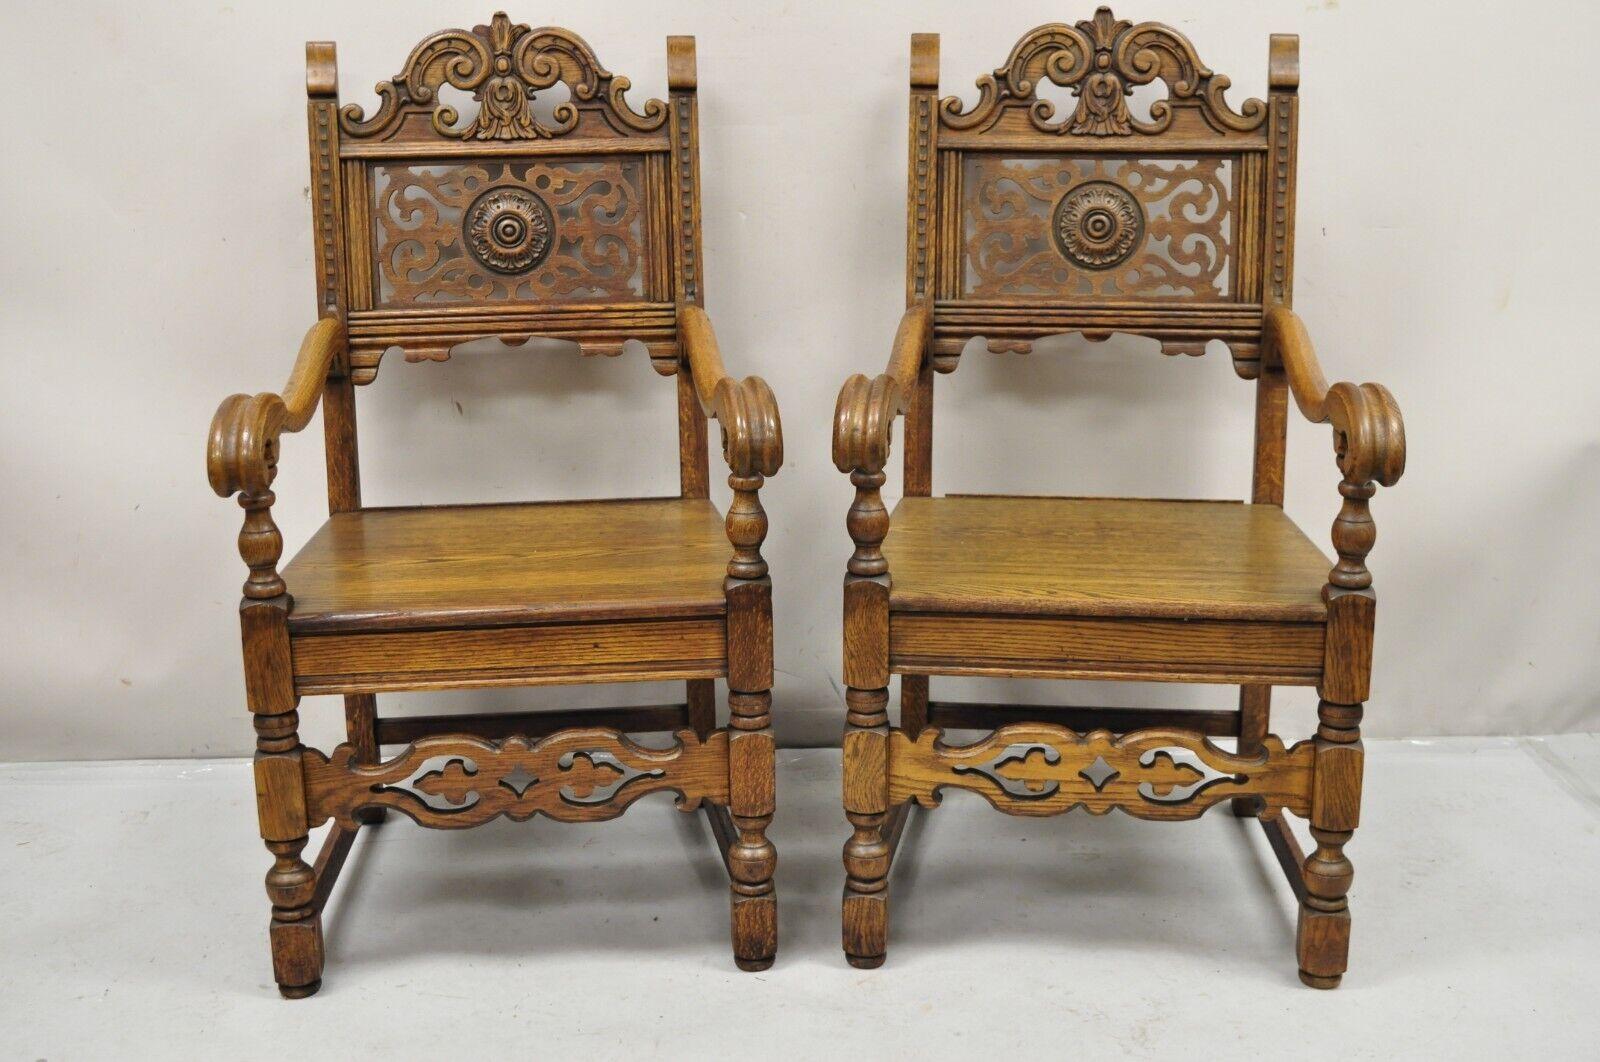 Antique Vanleigh Carved Oak Italian Renaissance Style Throne Arm Chairs - a Pair In Good Condition For Sale In Philadelphia, PA